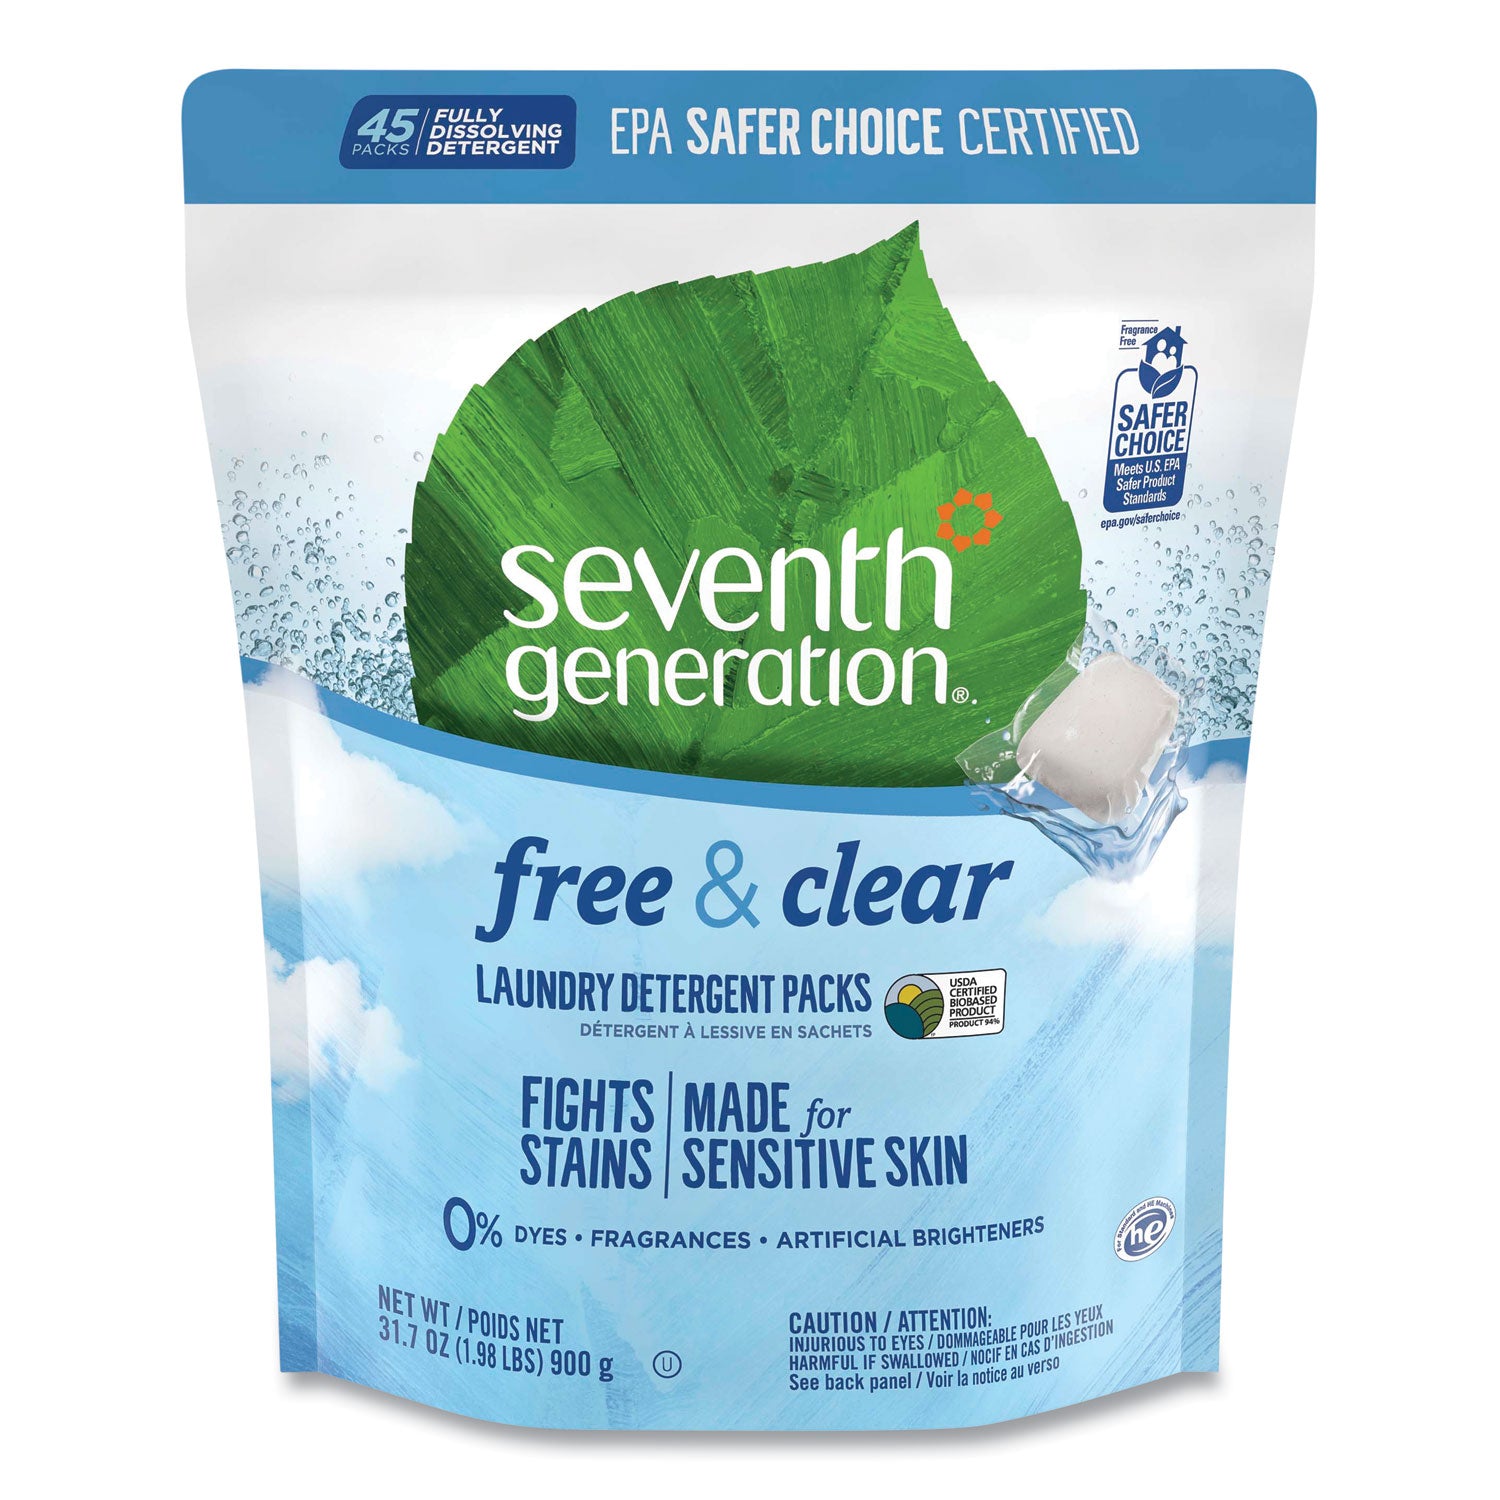 natural-laundry-detergent-packs-powder-unscented-45-packets-pack-8-carton_sev22977ct - 1